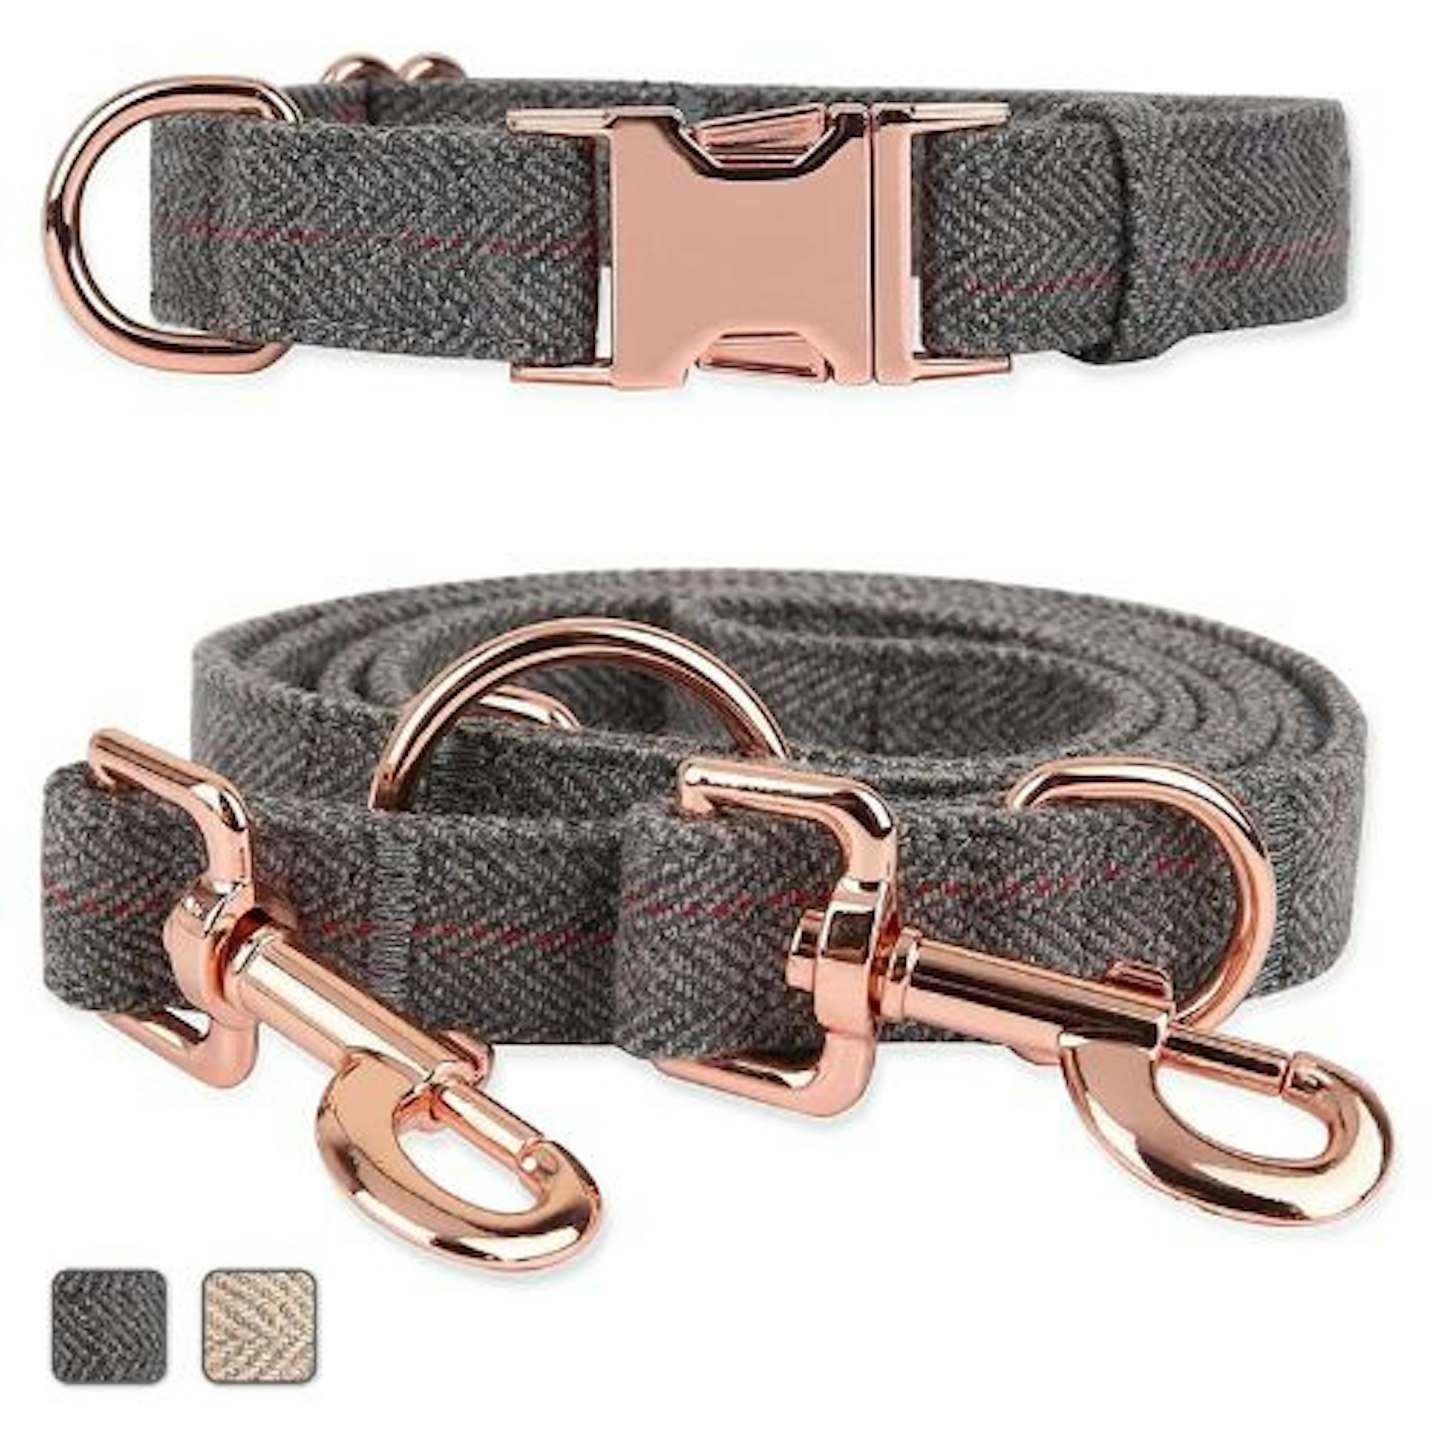 Rose Gold Dog Collar and Lead Set